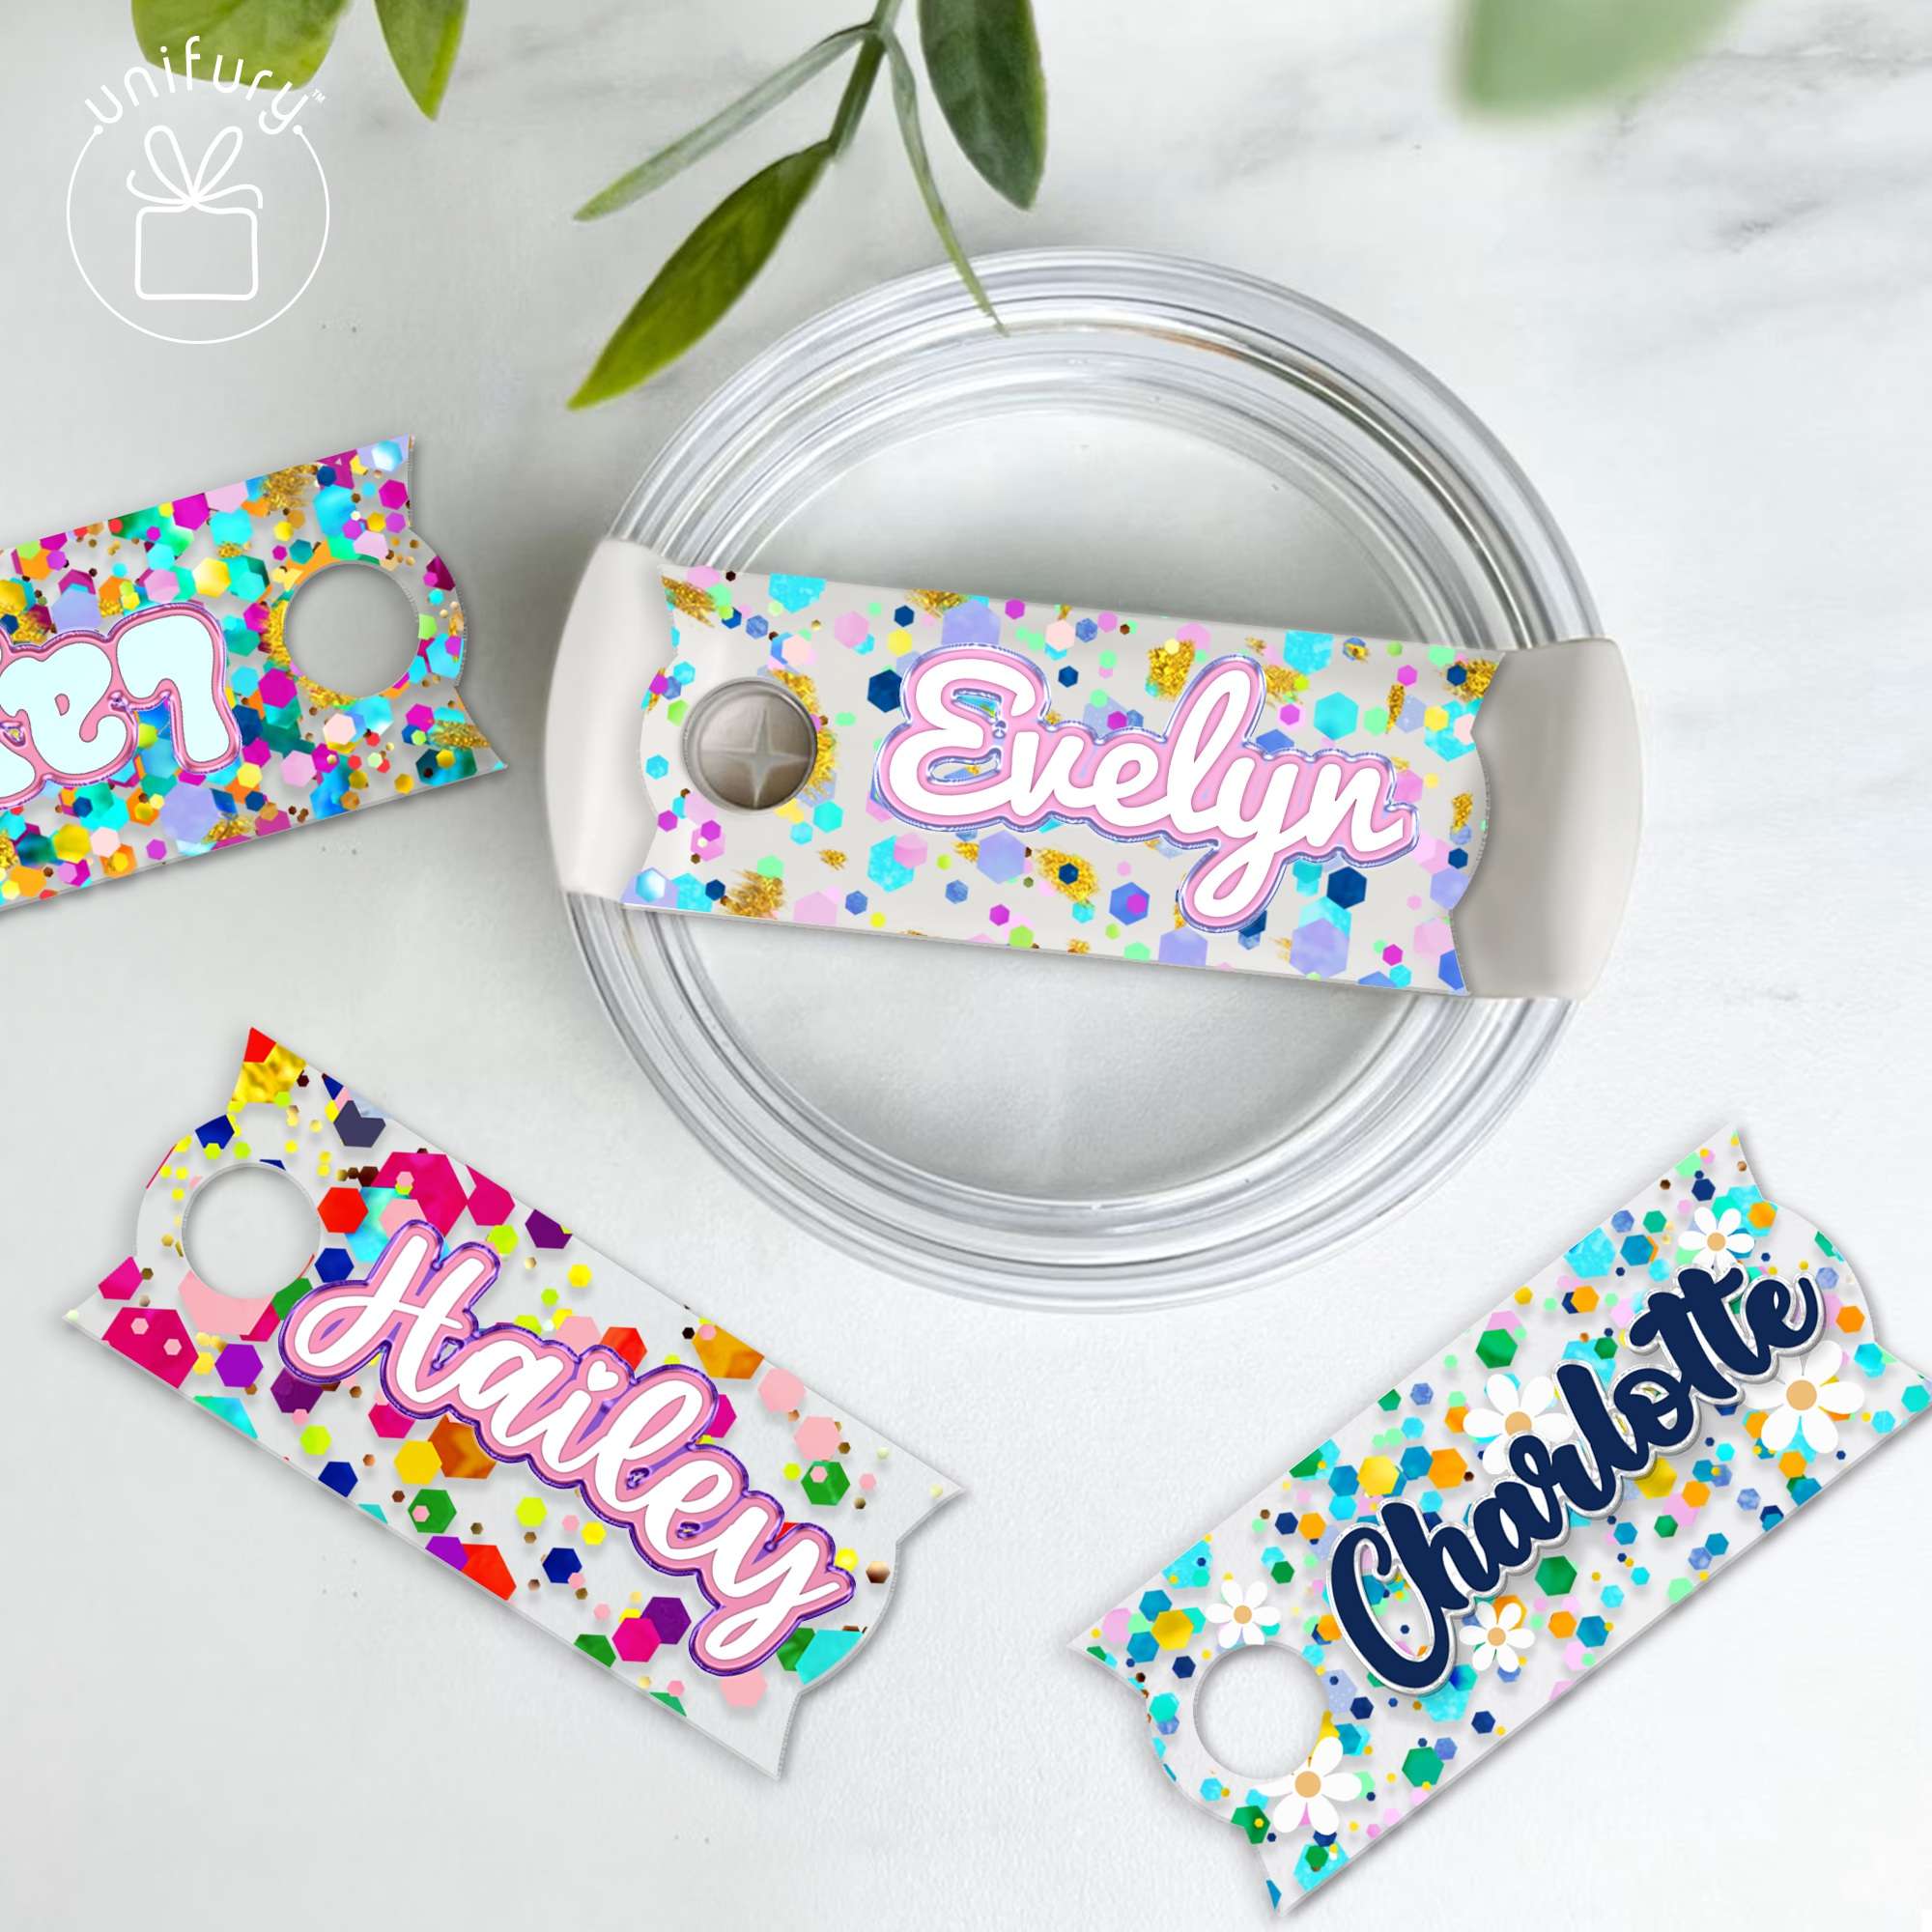 Stanley Lid Toppers/Name Tag – Mini Marie CO.